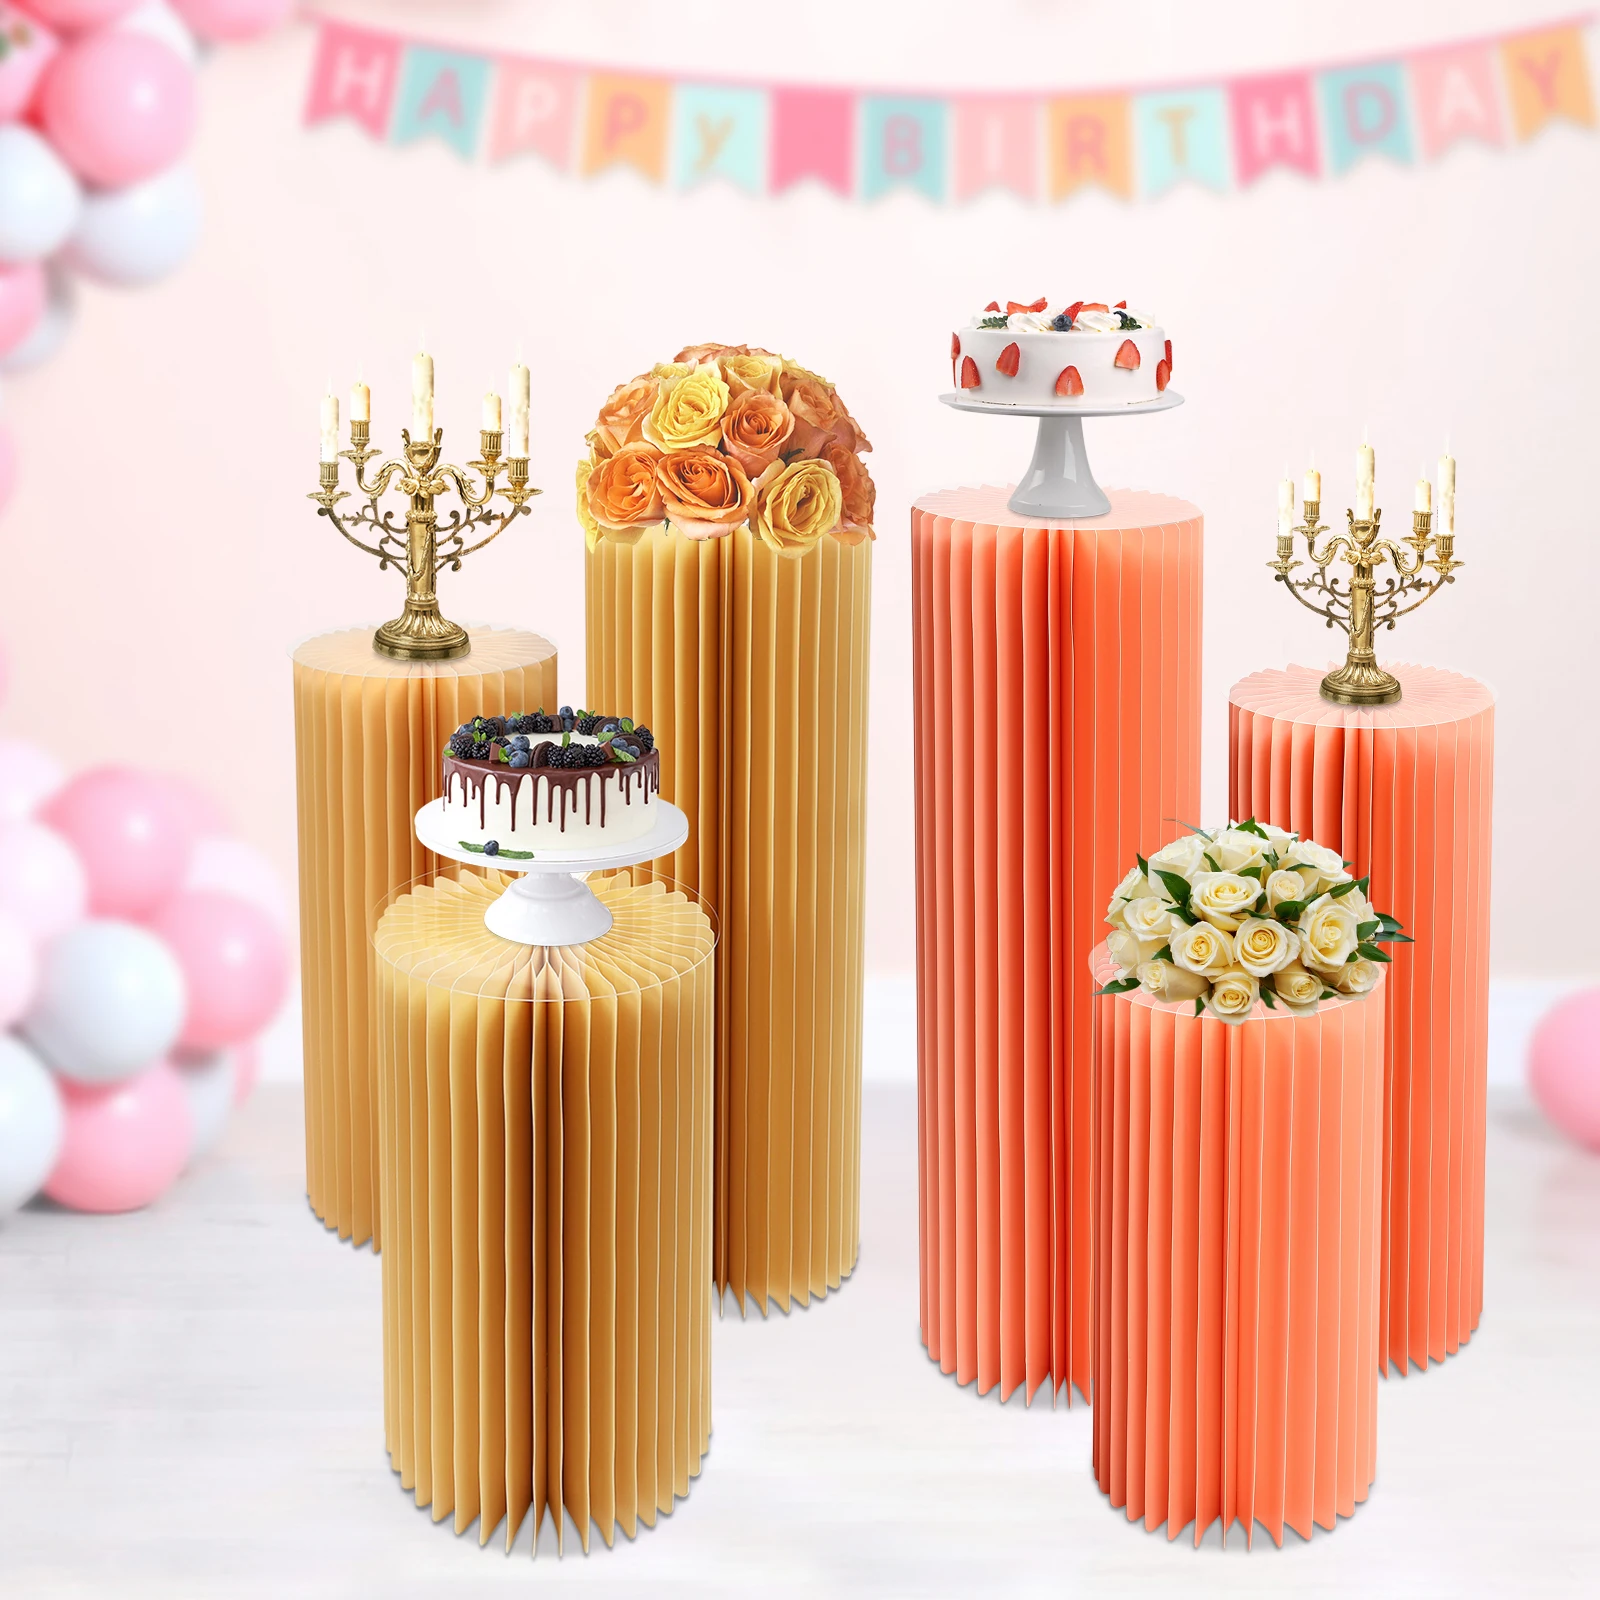 

3Pcs Foldable Paper Columns Flowers Display Pedestals Stands for Wedding Engagement Birthday Party Celebration Garden Decoration